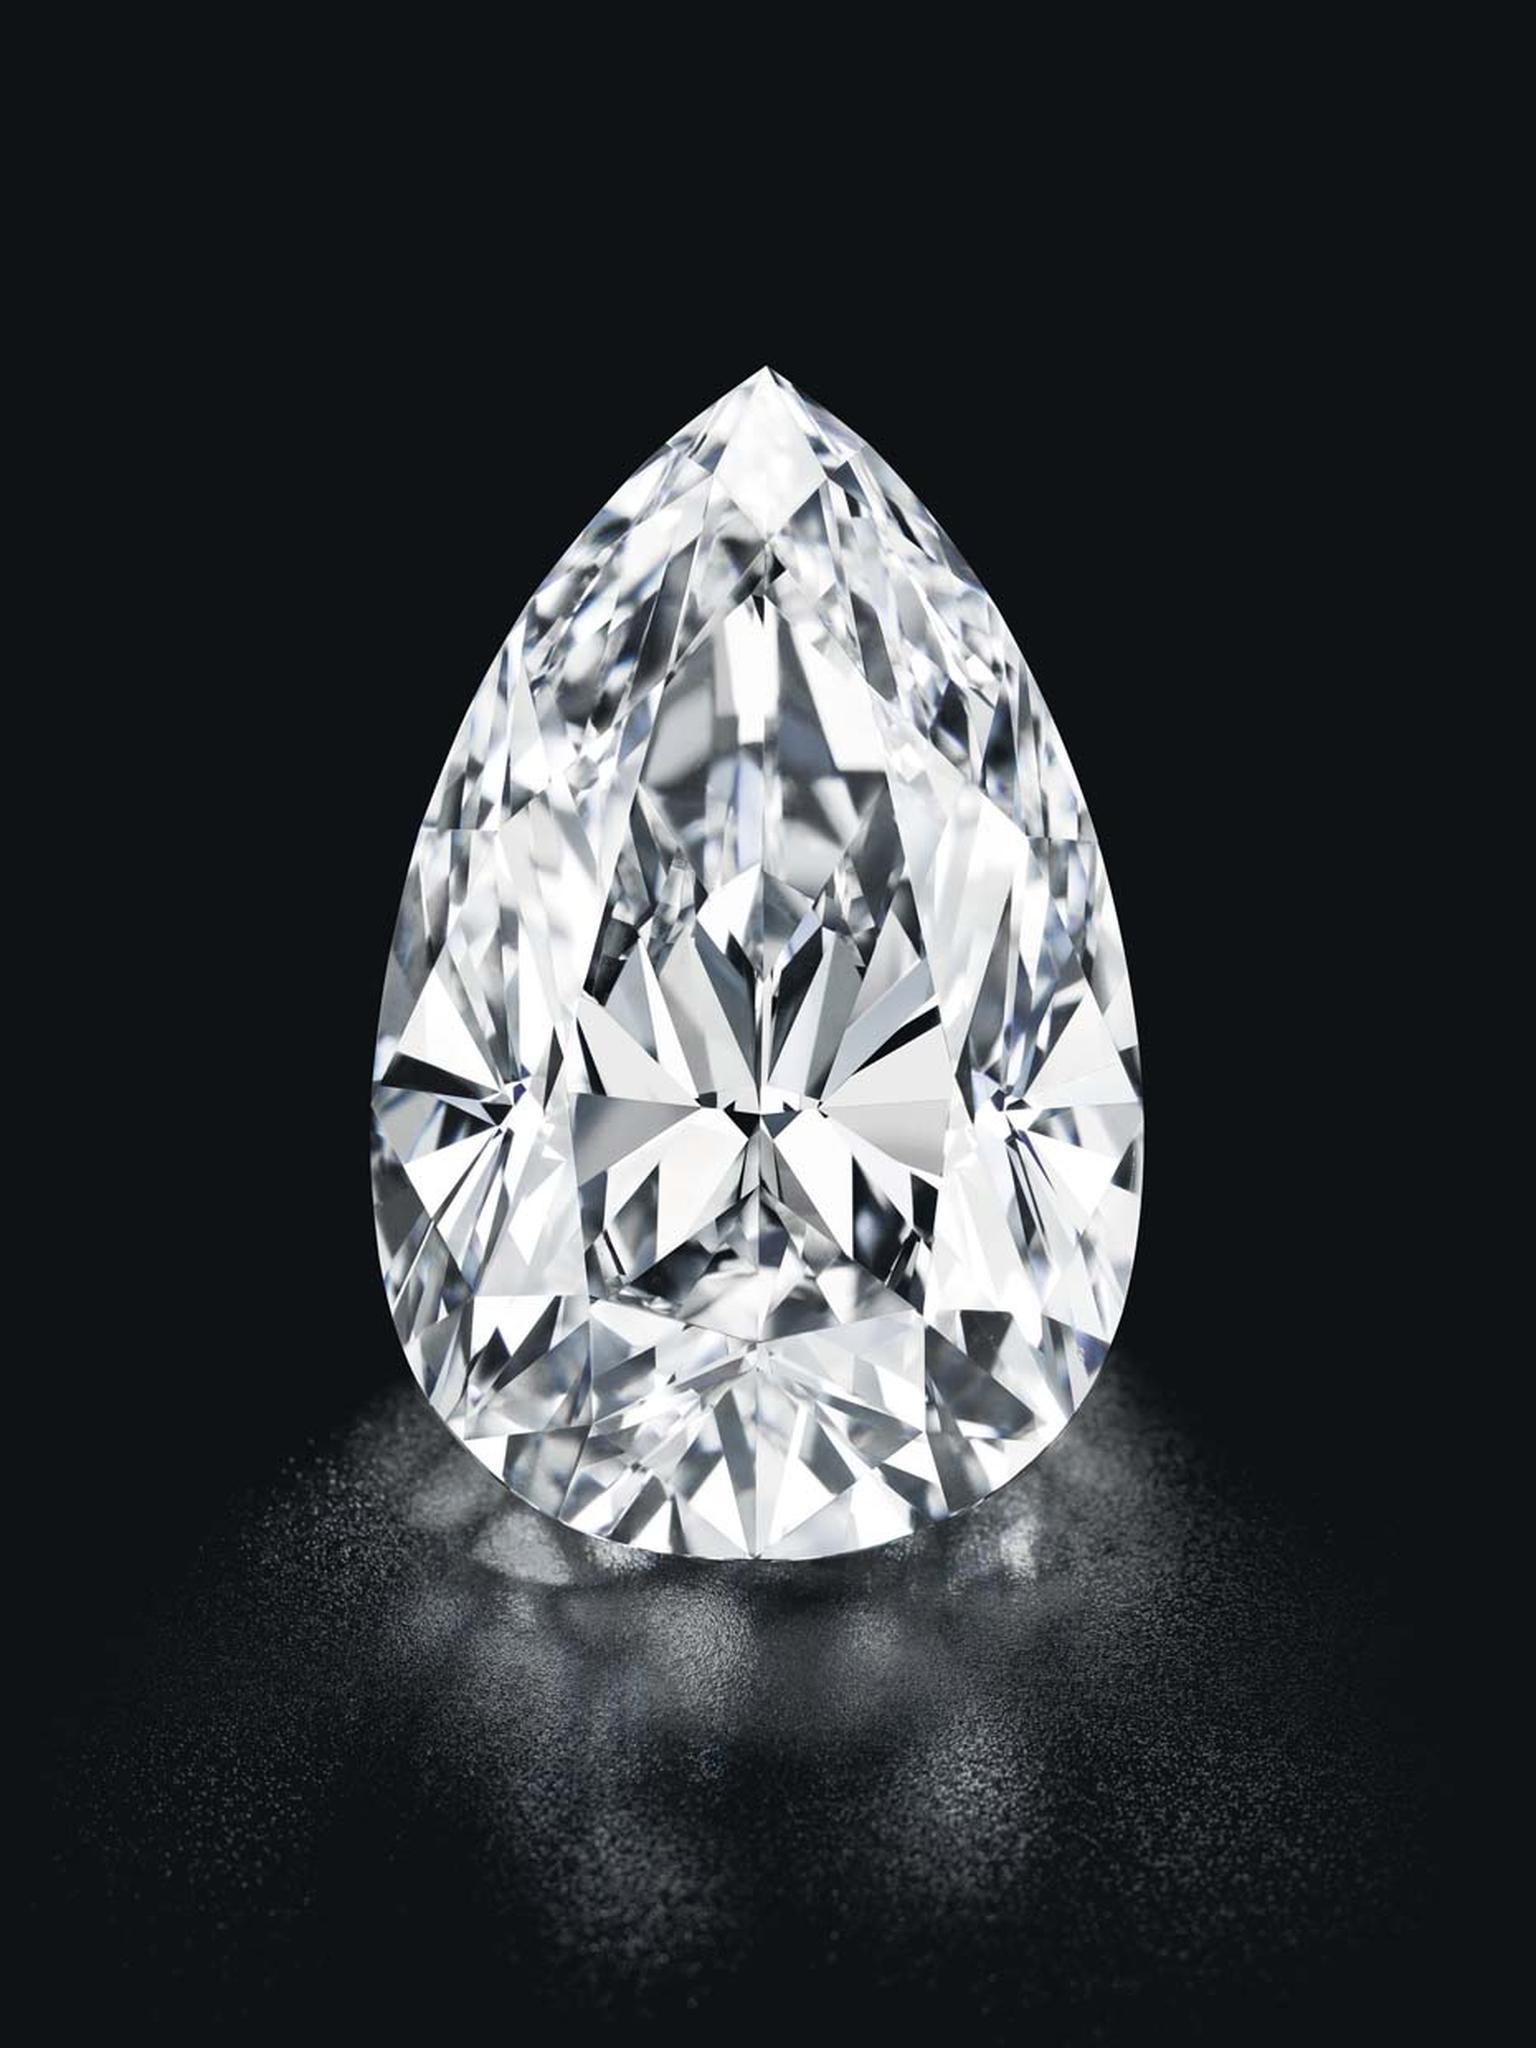 This 55.52ct pear-shaped D flawless diamond sold for $9.03 million at Christie's Geneva as part of its Magnificent Jewels Sale this week.